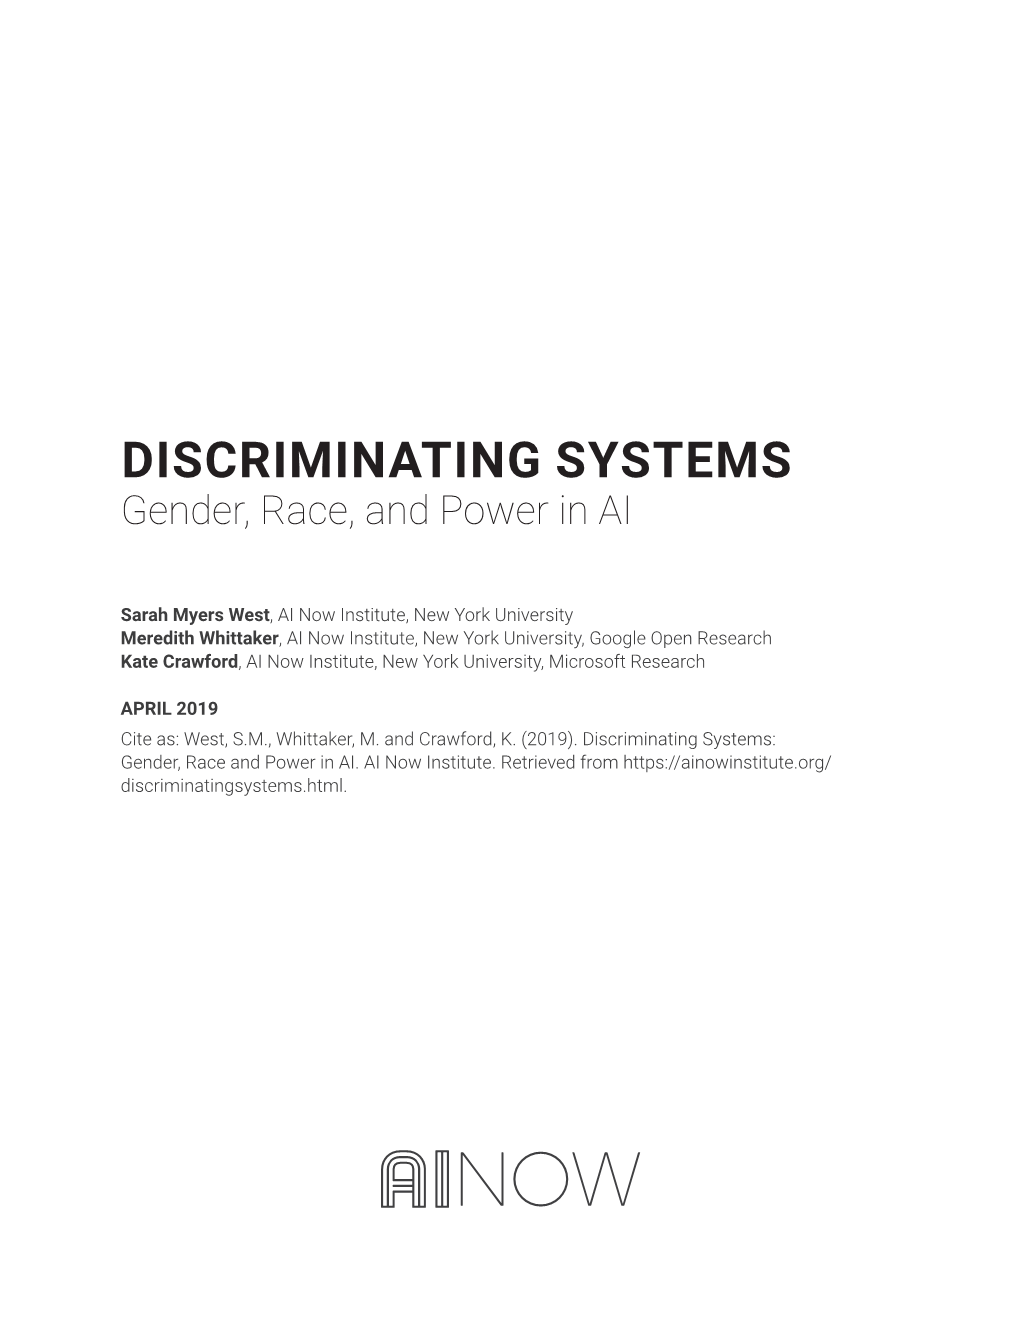 DISCRIMINATING SYSTEMS Gender, Race, and Power in AI